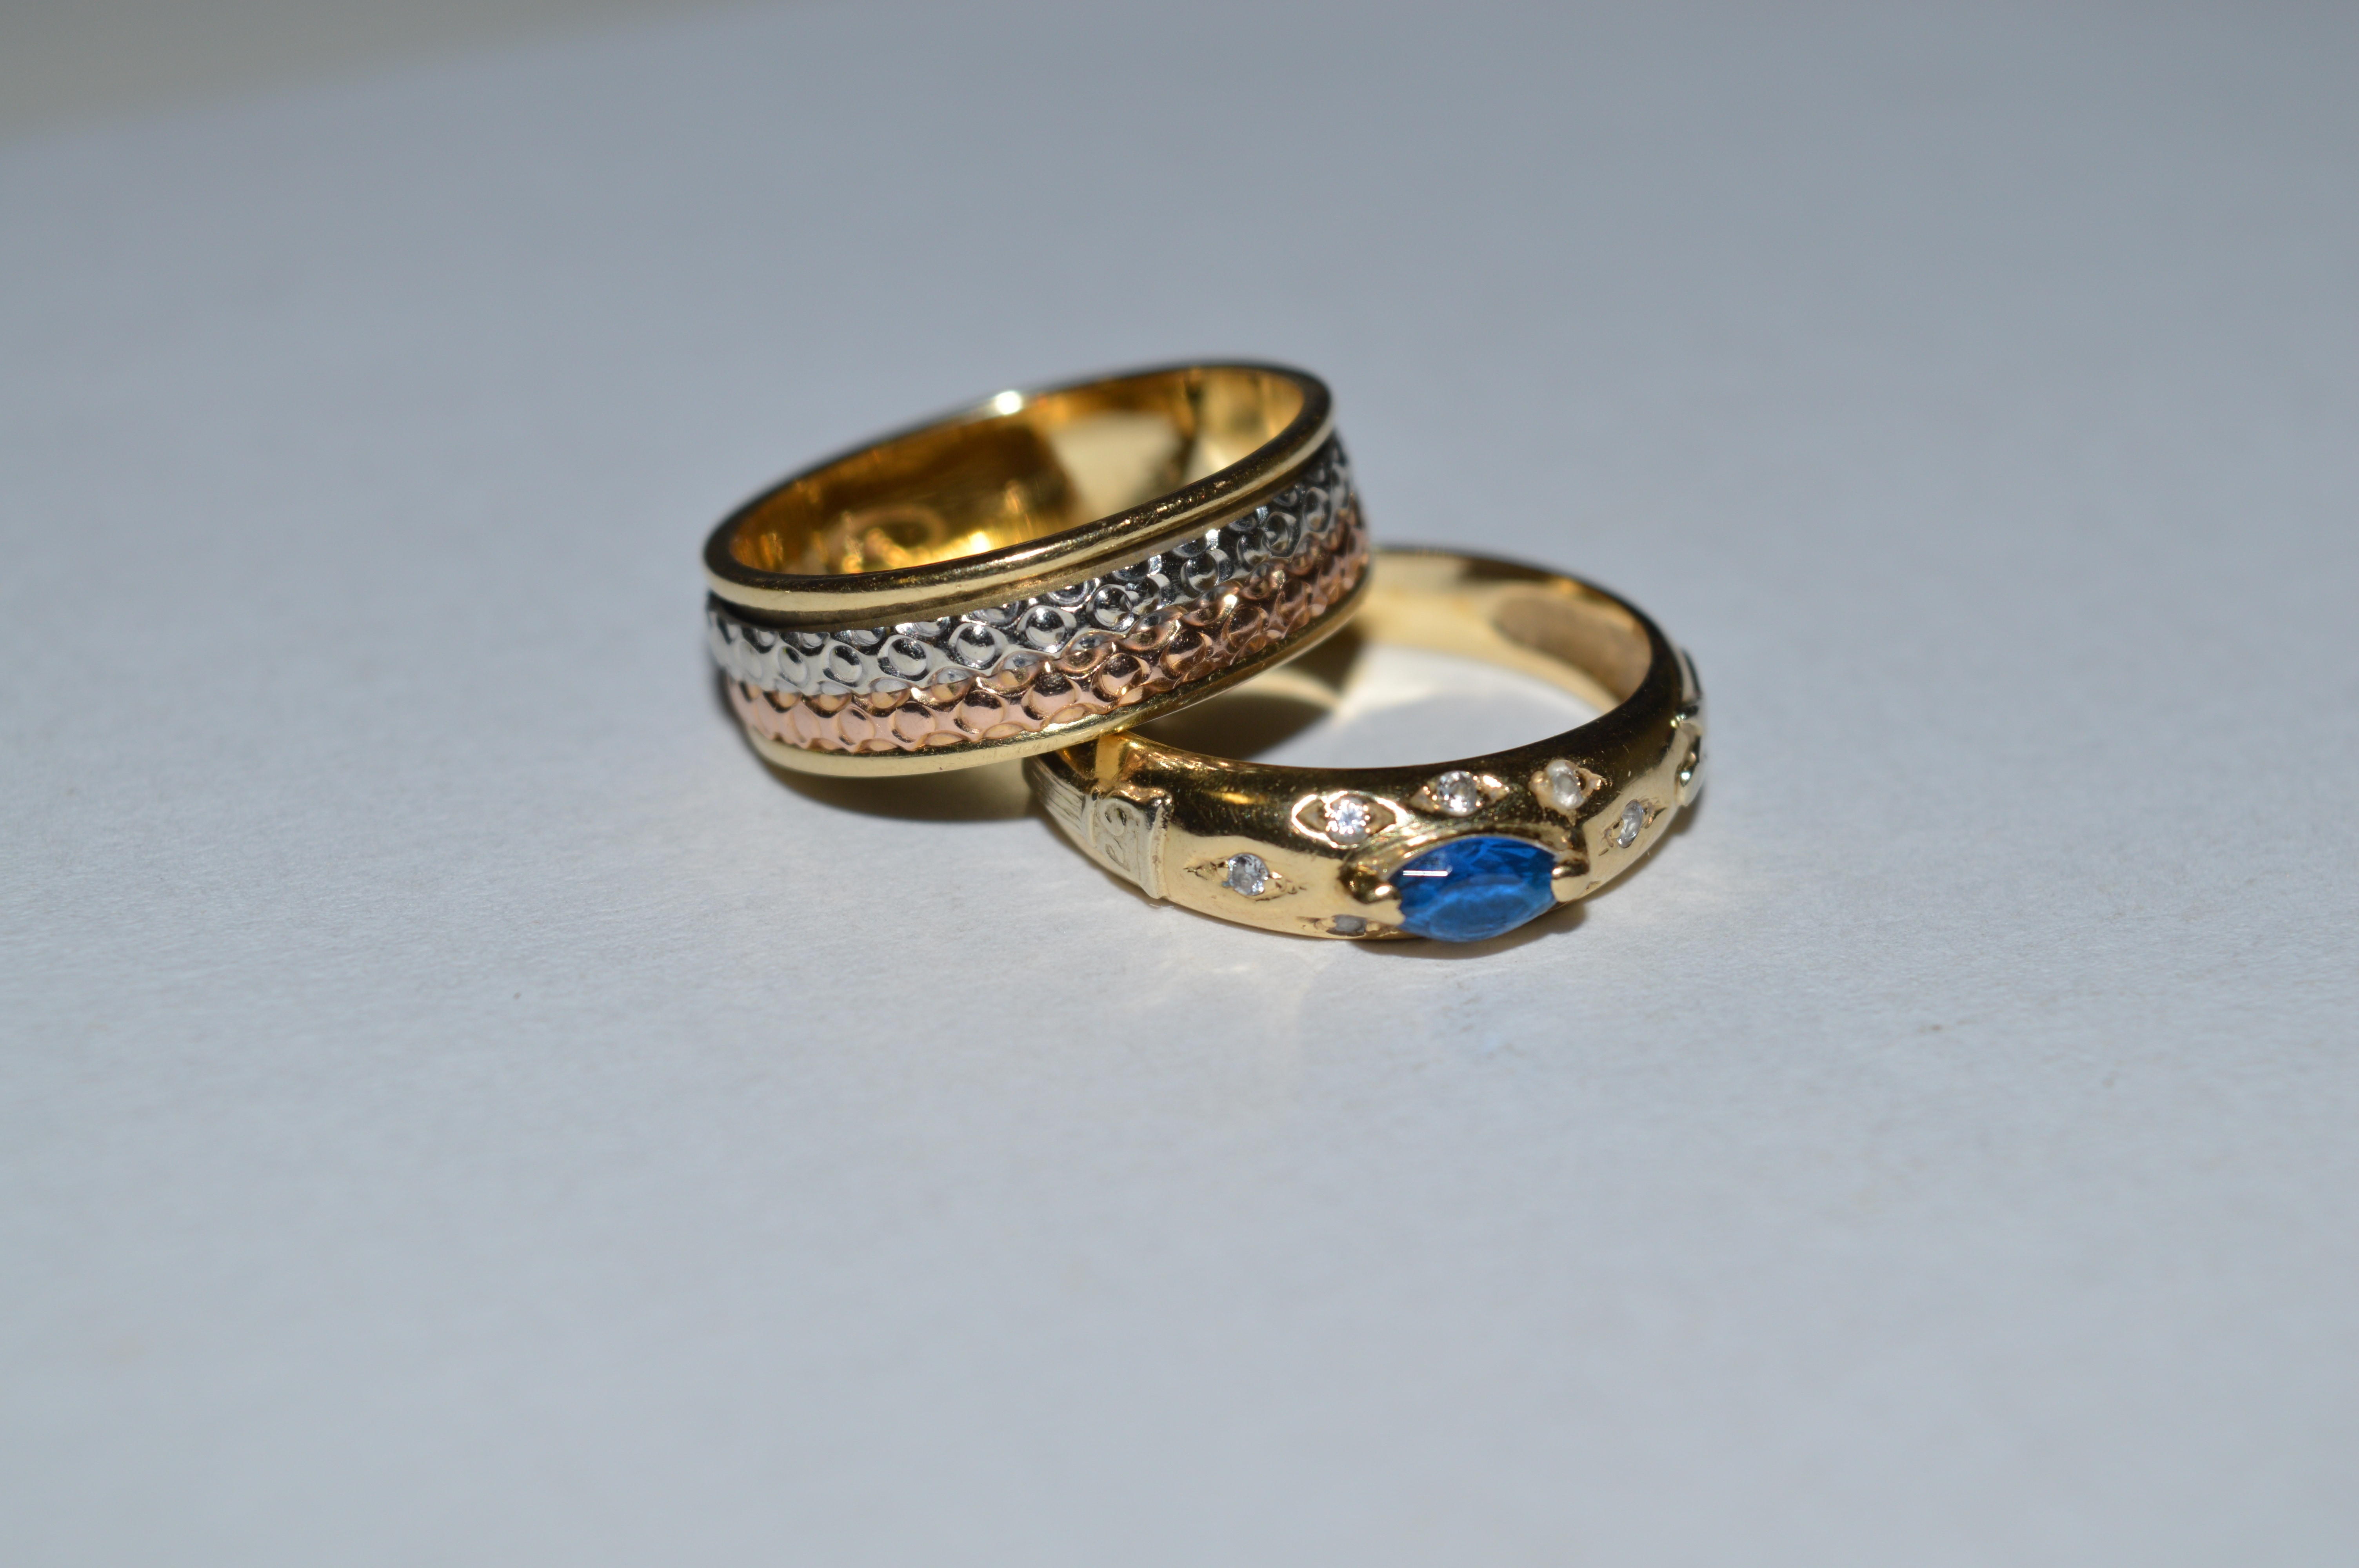 gold band and gold with blue gemstone ring